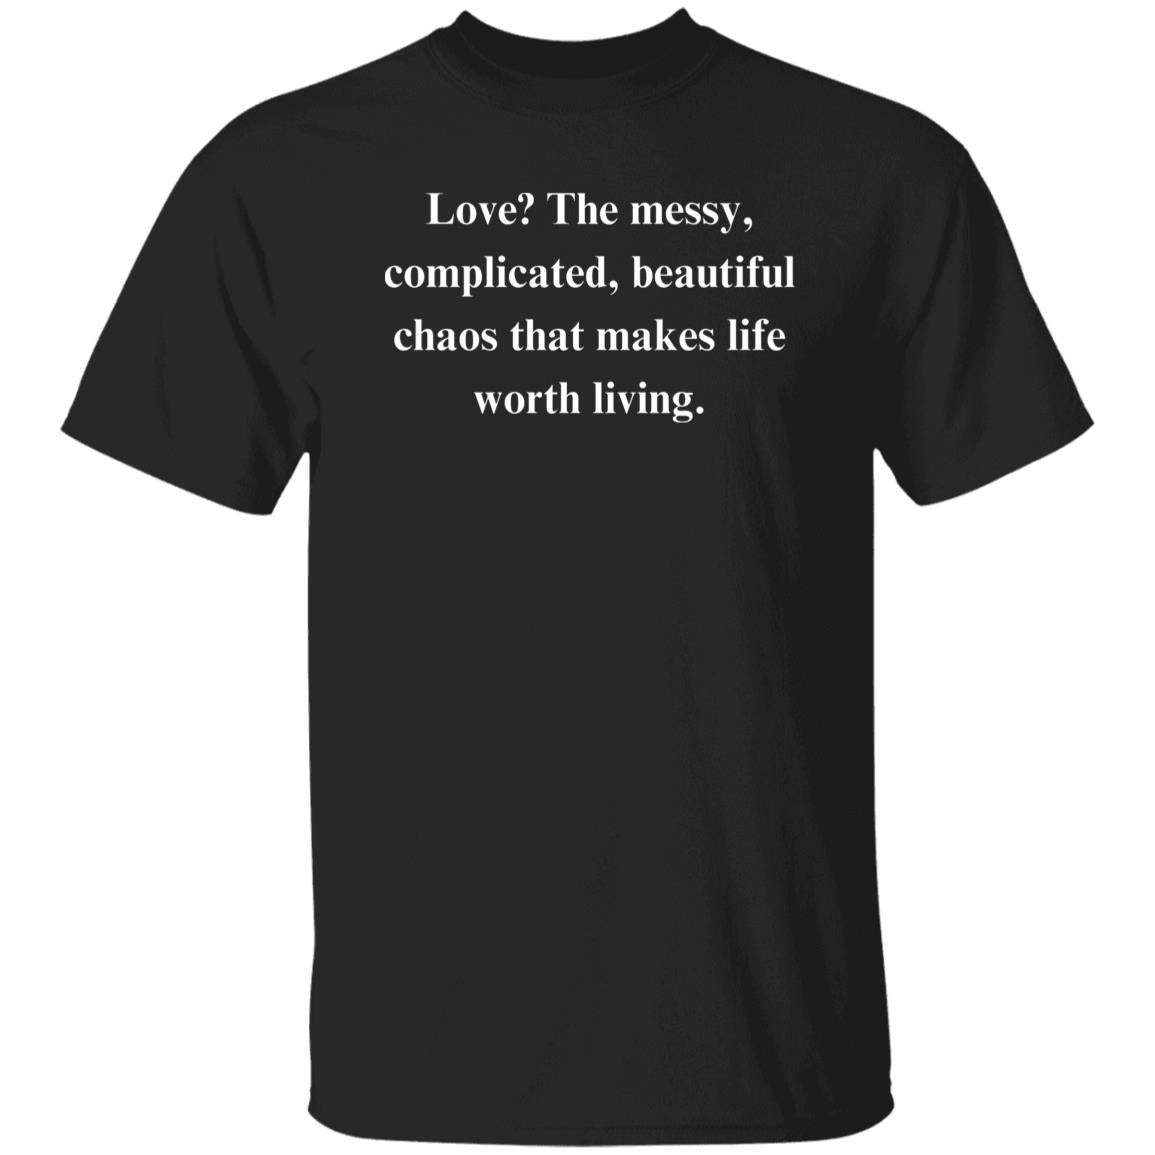 Love definition Sarcastic Unisex T-Shirt gift for him, her Humorous tee Black anniversary gift-Black-Family-Gift-Planet